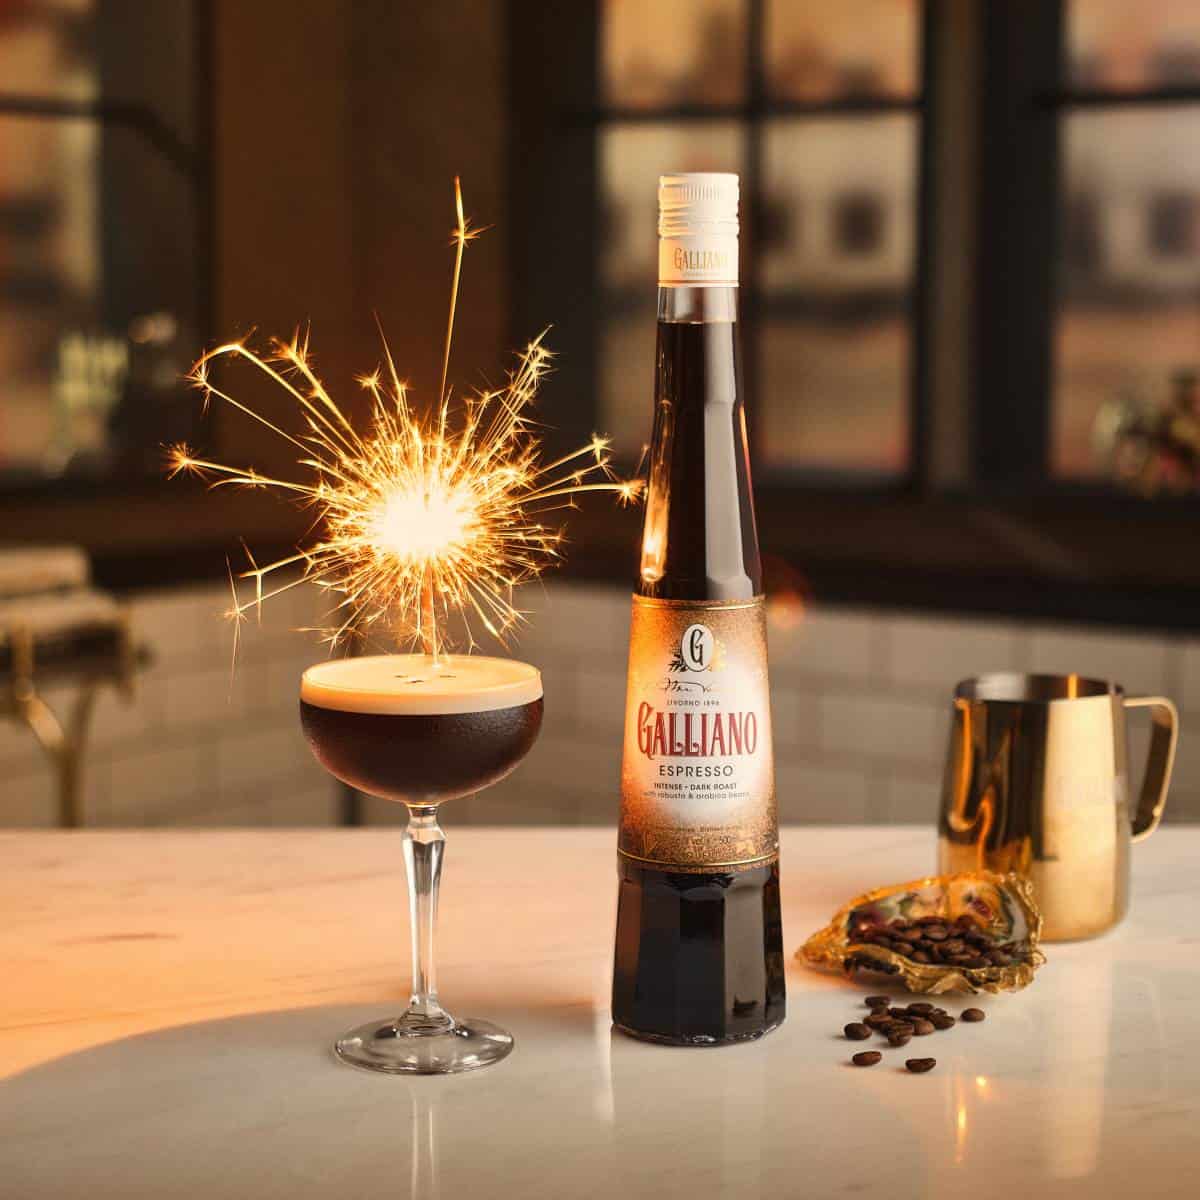 Espresso Martini cocktail with an espresso liqueur bottle and fireworks